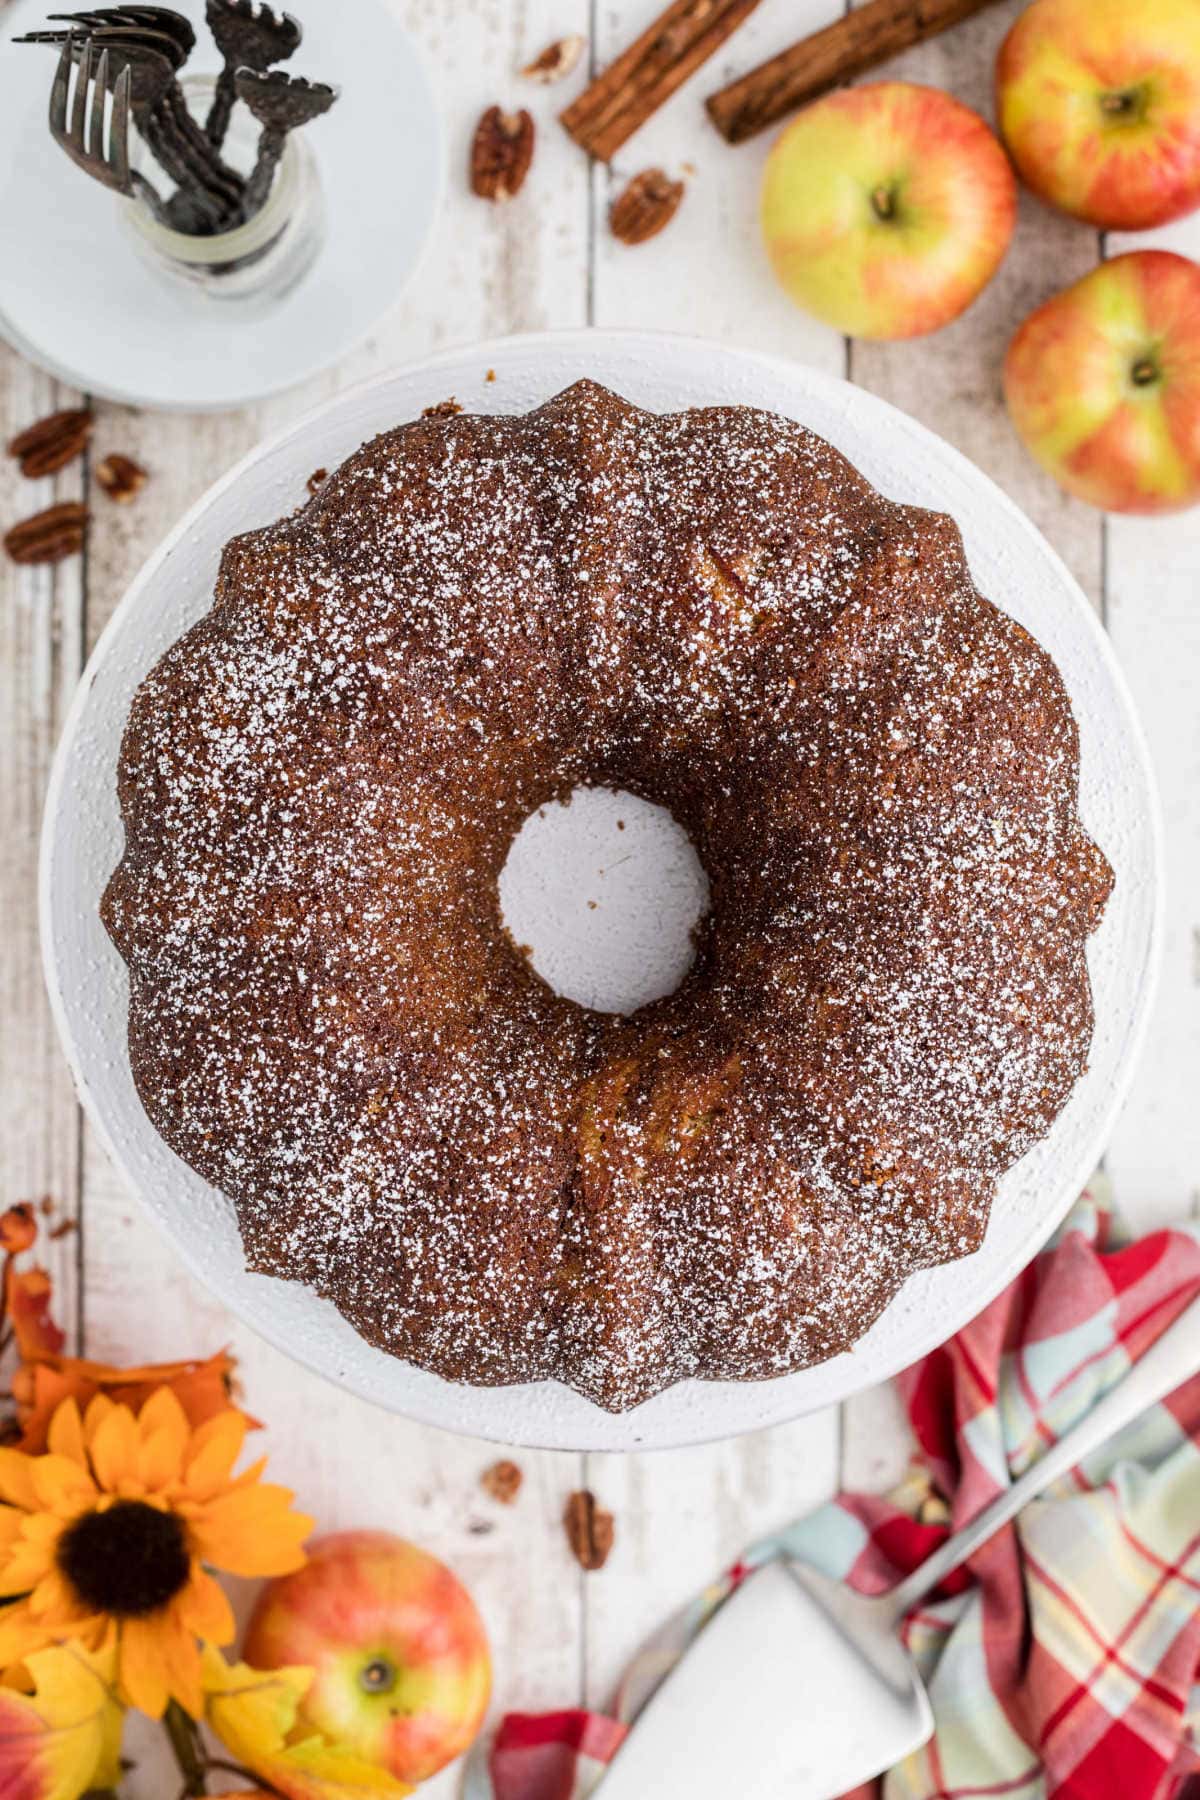 Overhead view of the apple spice bundt cake on a table.